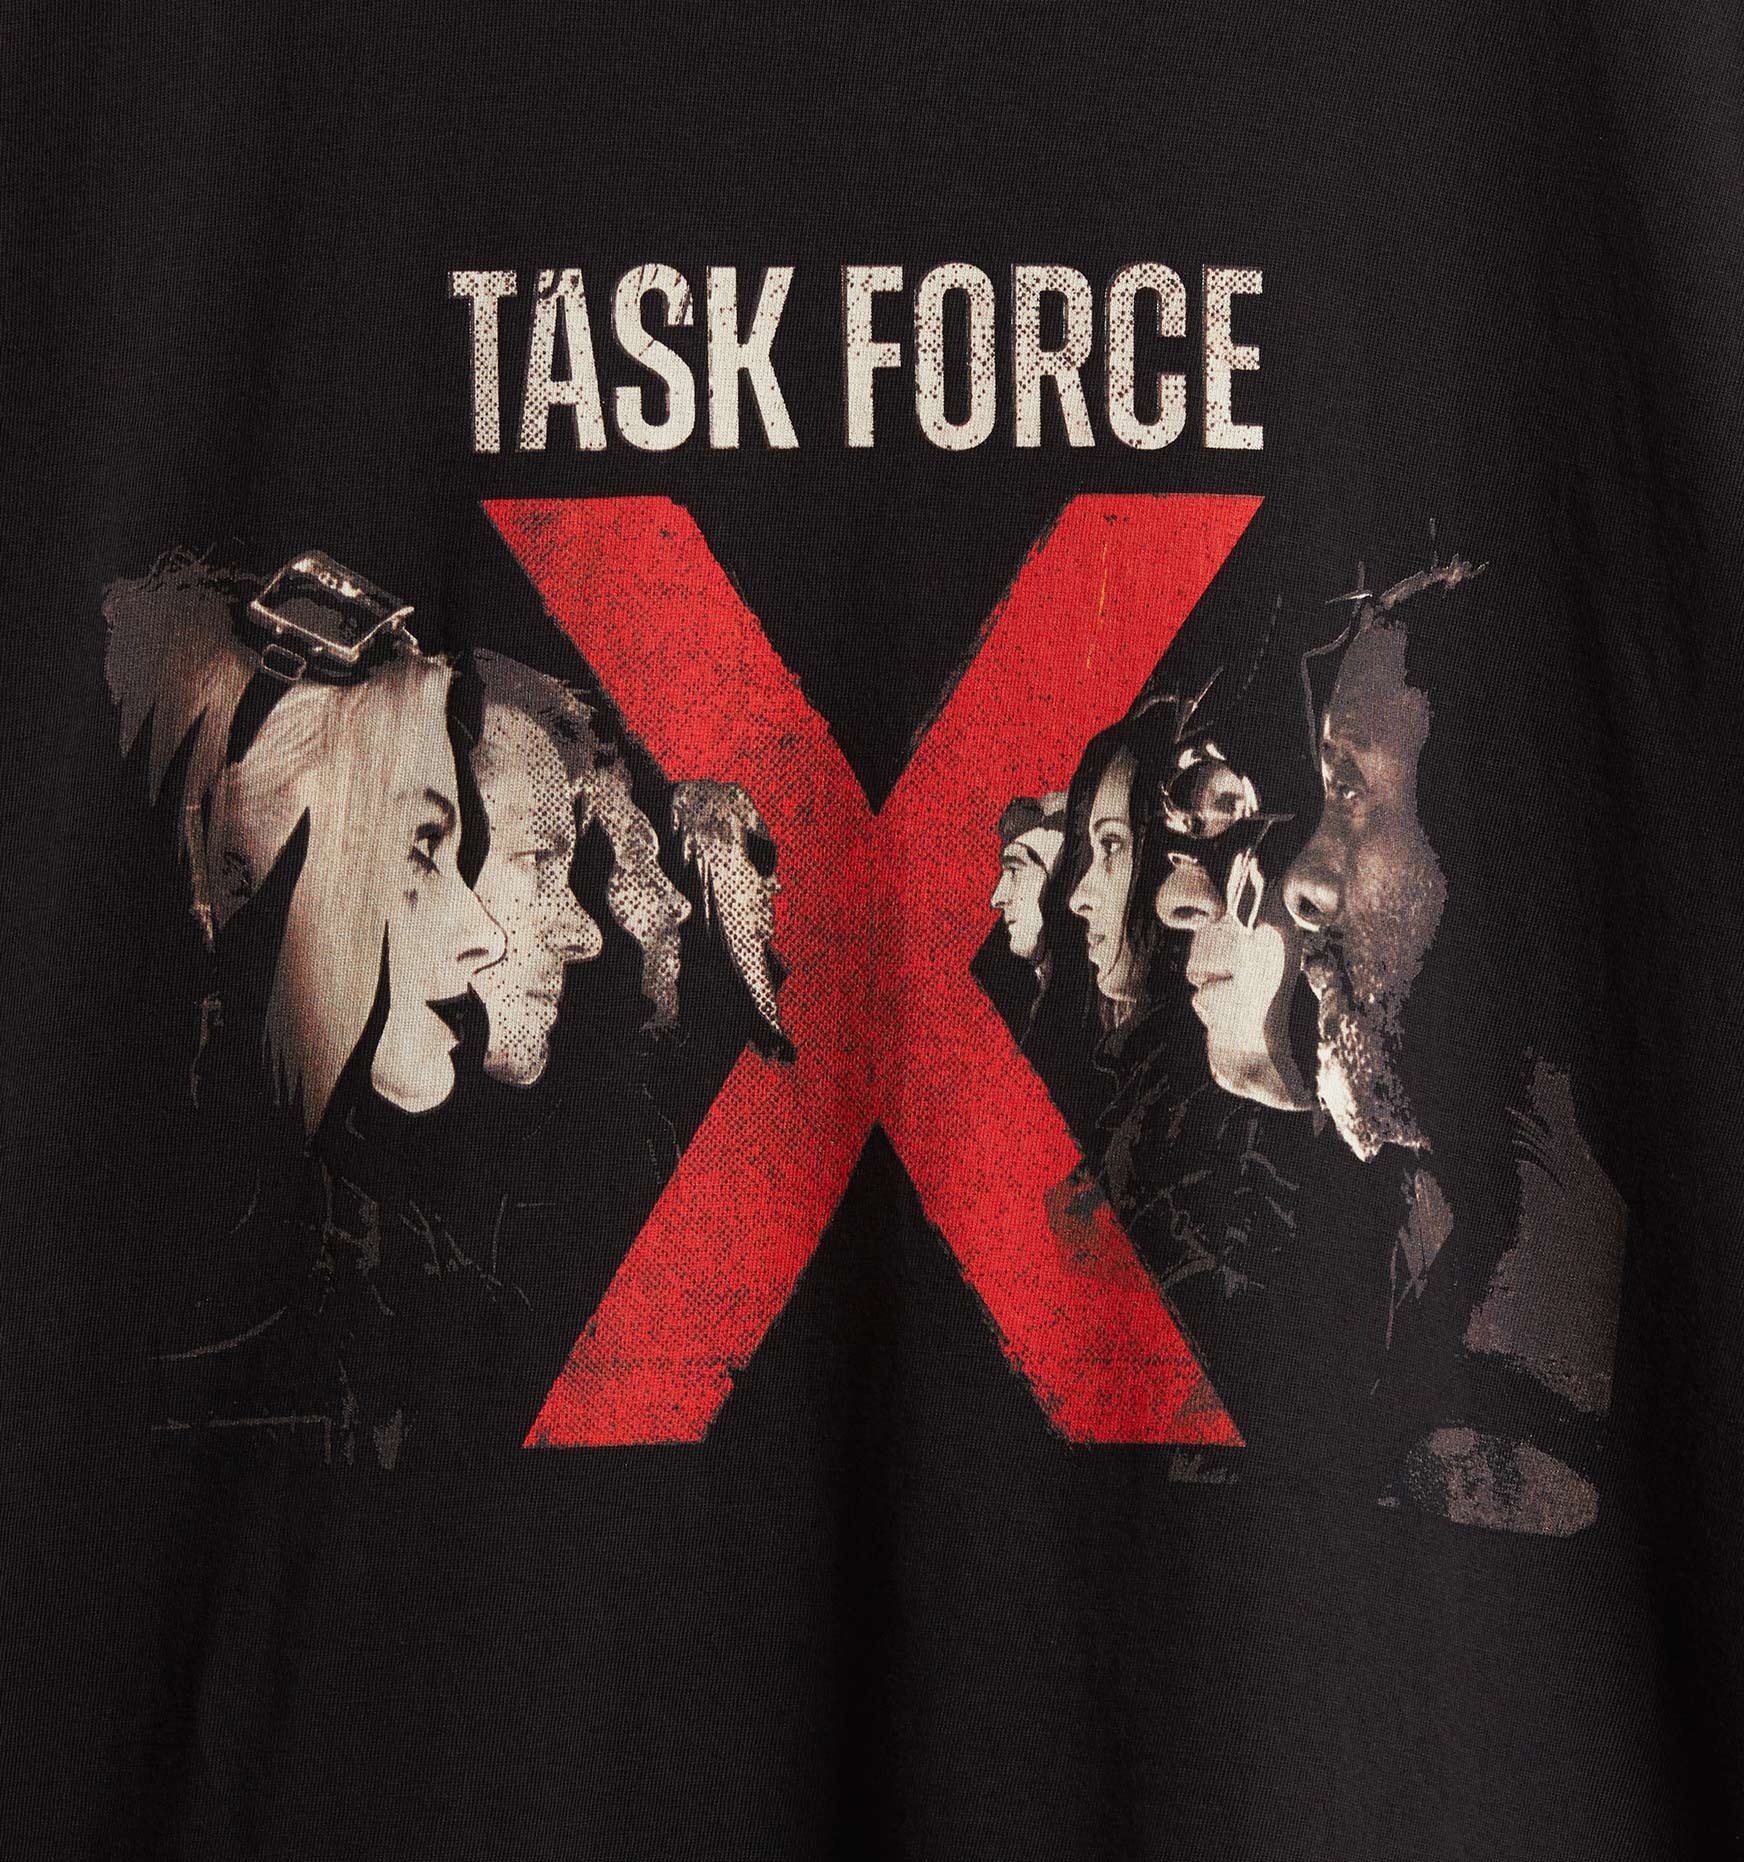 Cotton Tee LC - Task Force X